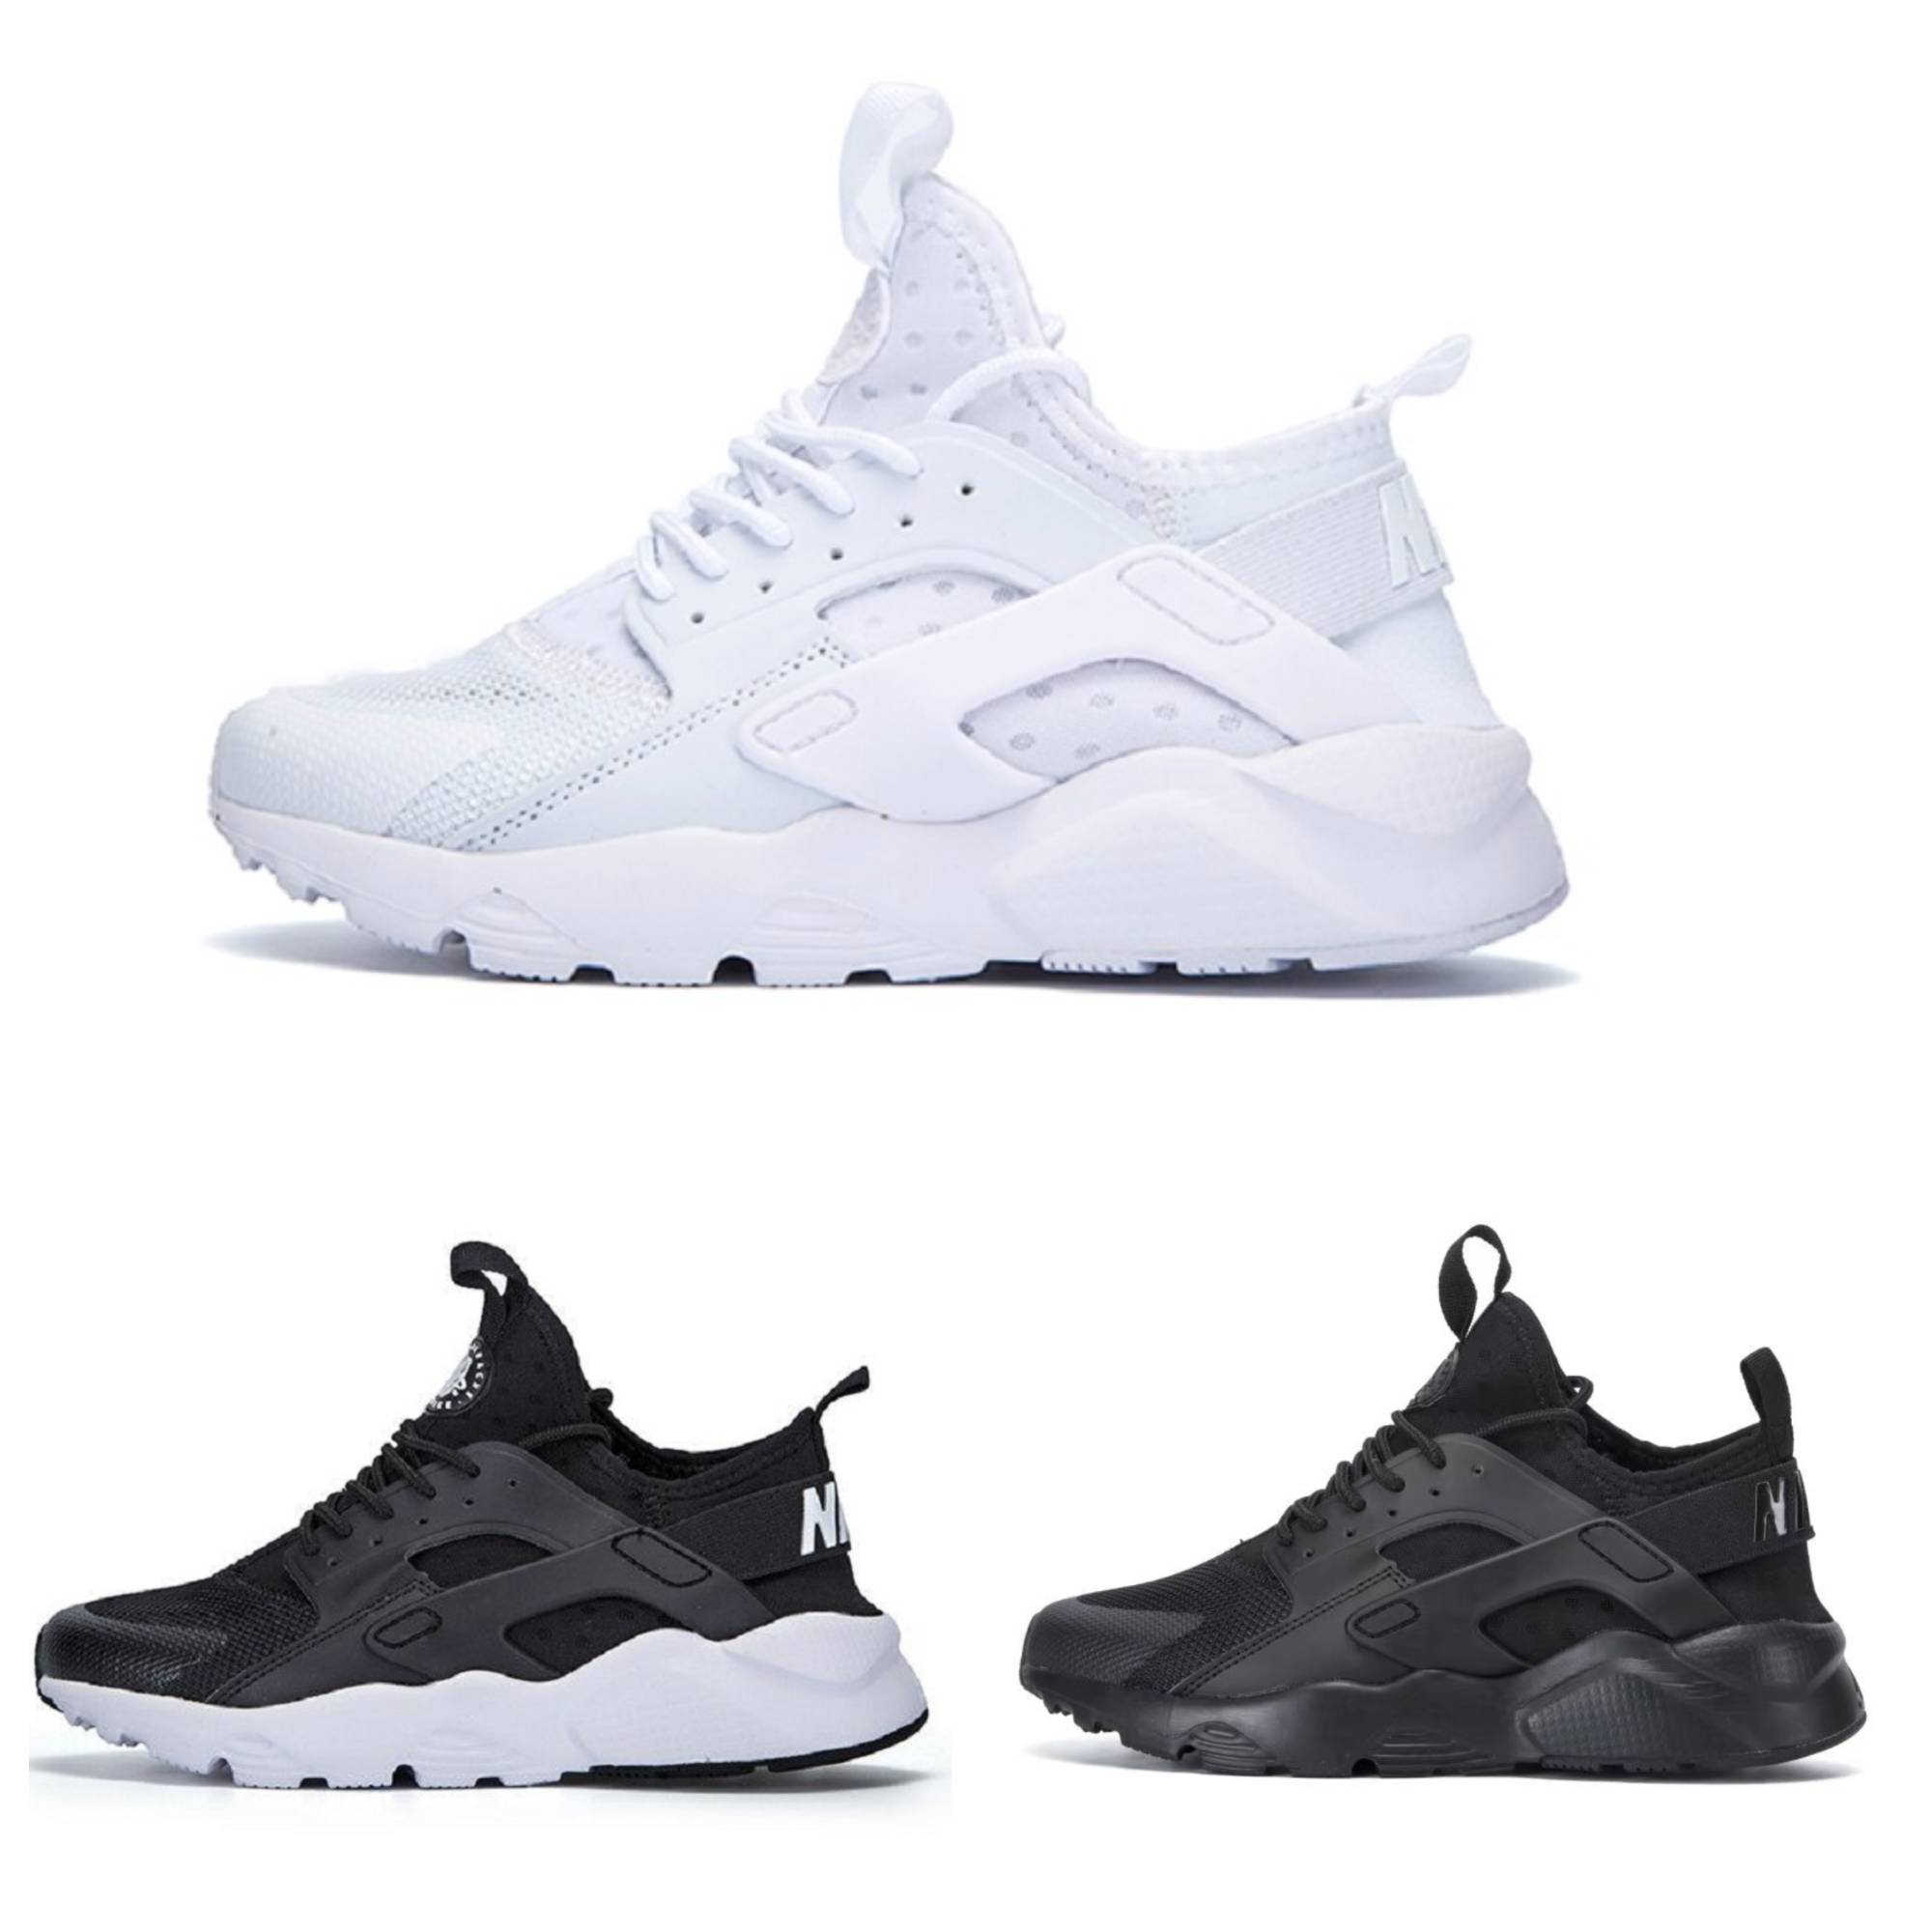 

2023 Designer Huarache air Casual Shoes 4.0 1.0 Men Women Shoe Triple White Black Red Grey max huaraches Mens Trainers outdoor Sports Sneakers walking Trainer Runner, Shoe lace